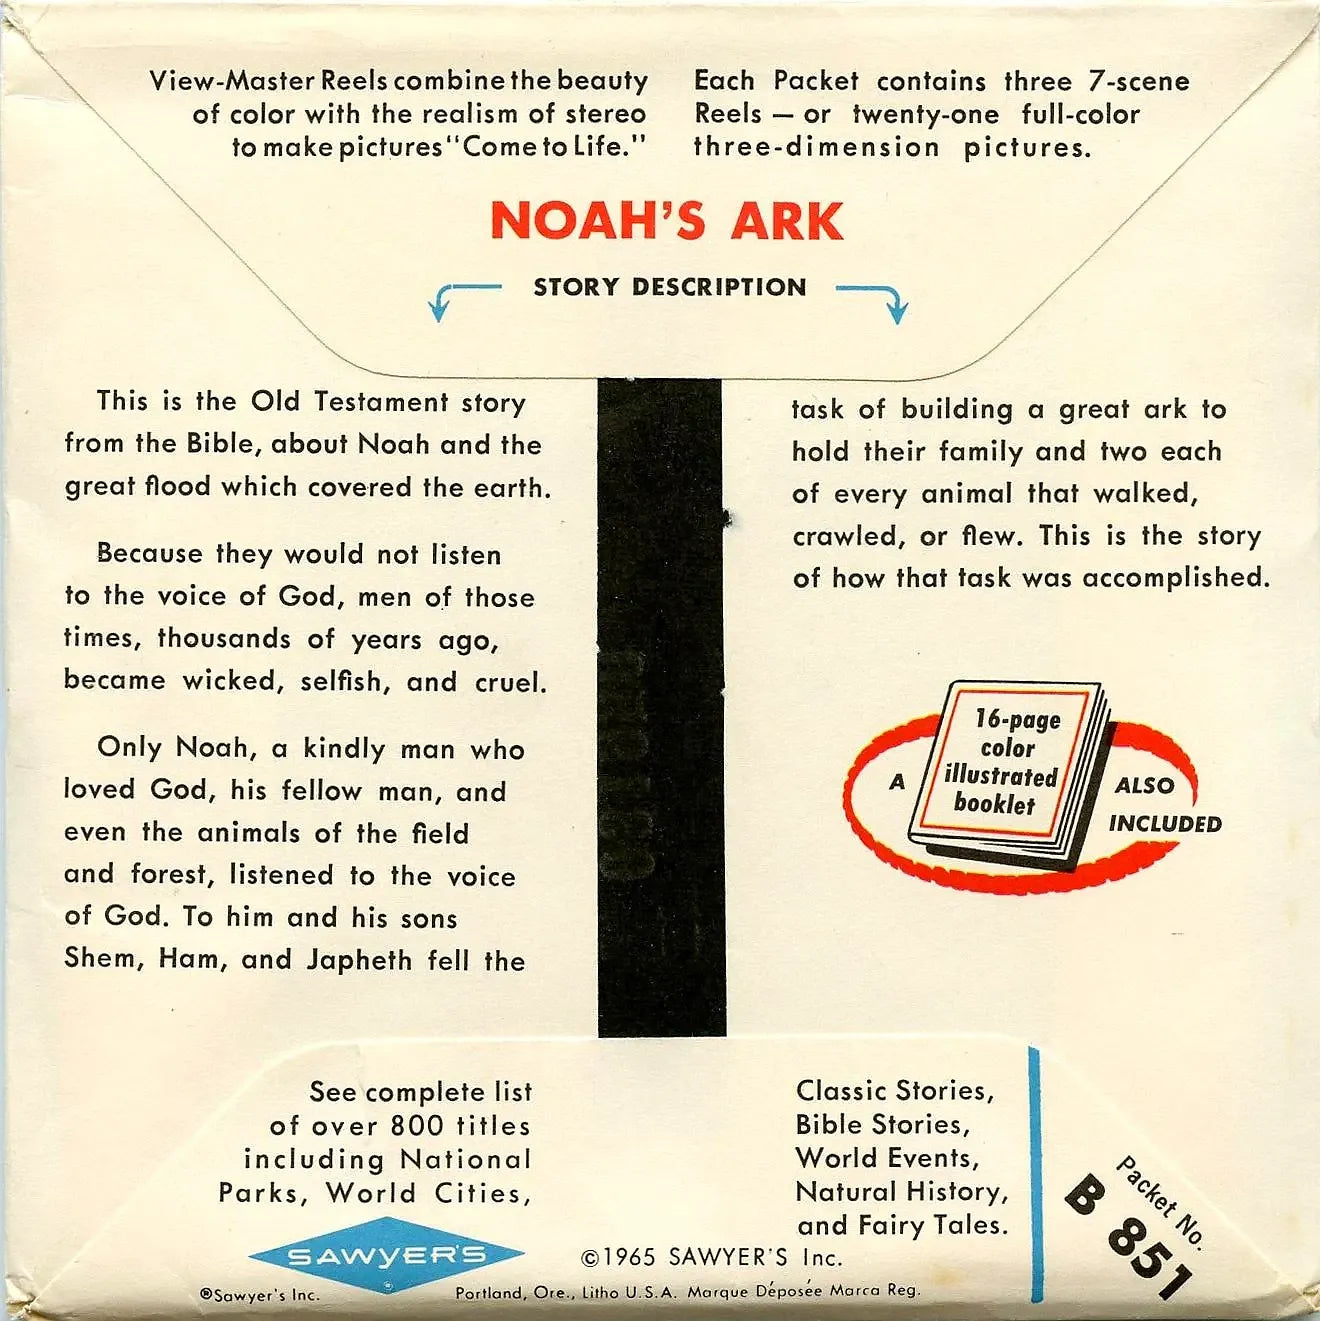 Noah's Ark - View-Master 3 Reel Packet - 1960s views - vintage -  (PKT-B851-S6A)